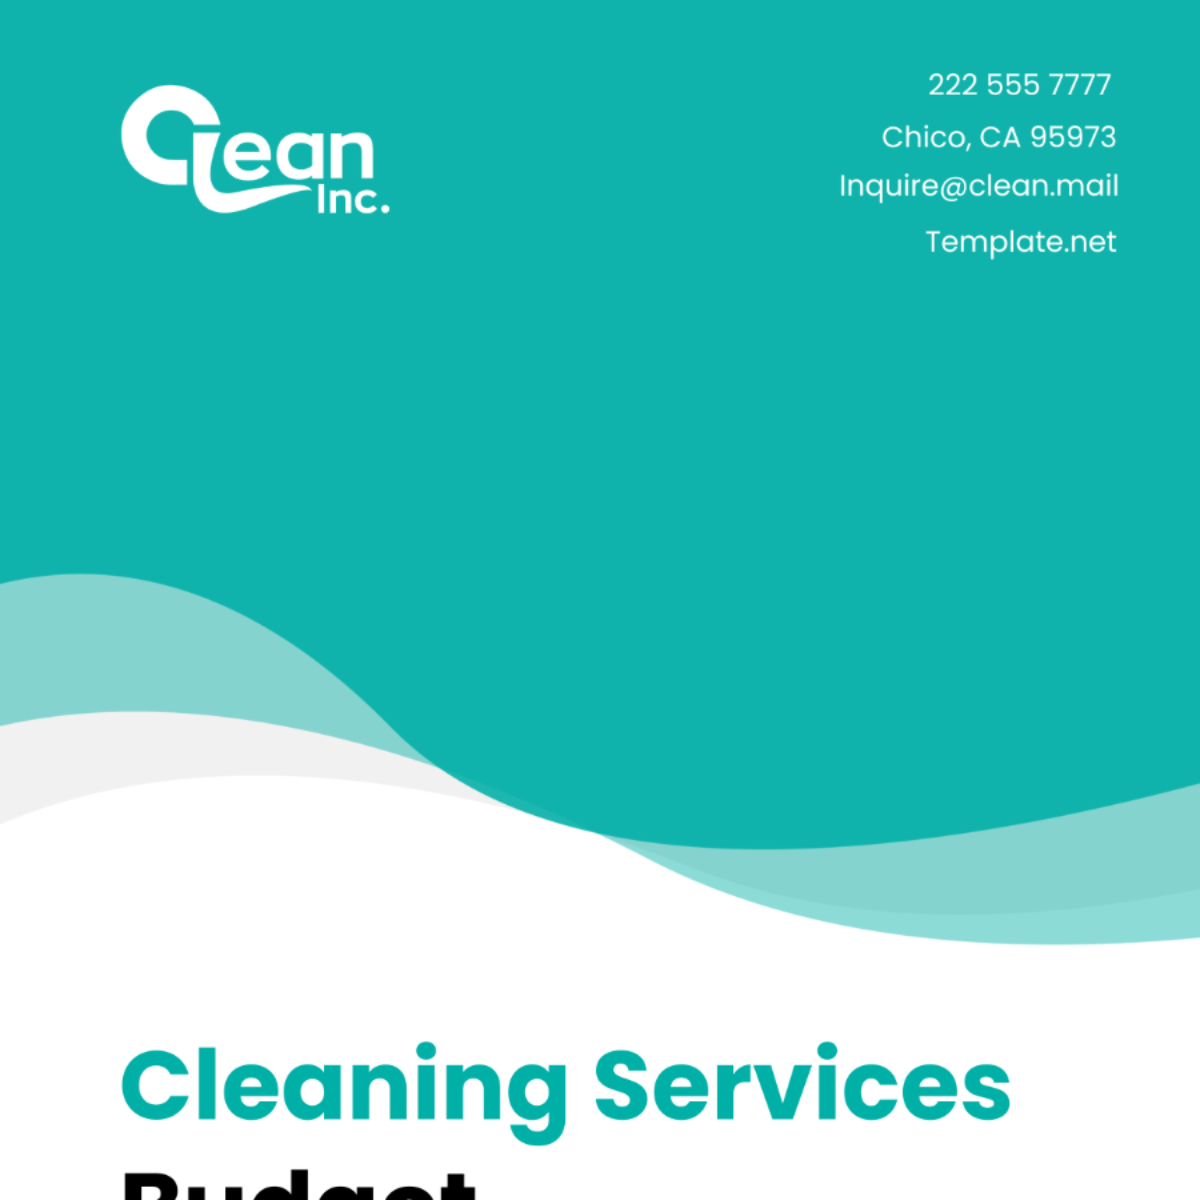 Cleaning Services Budget Management Guide for Supervisors Template